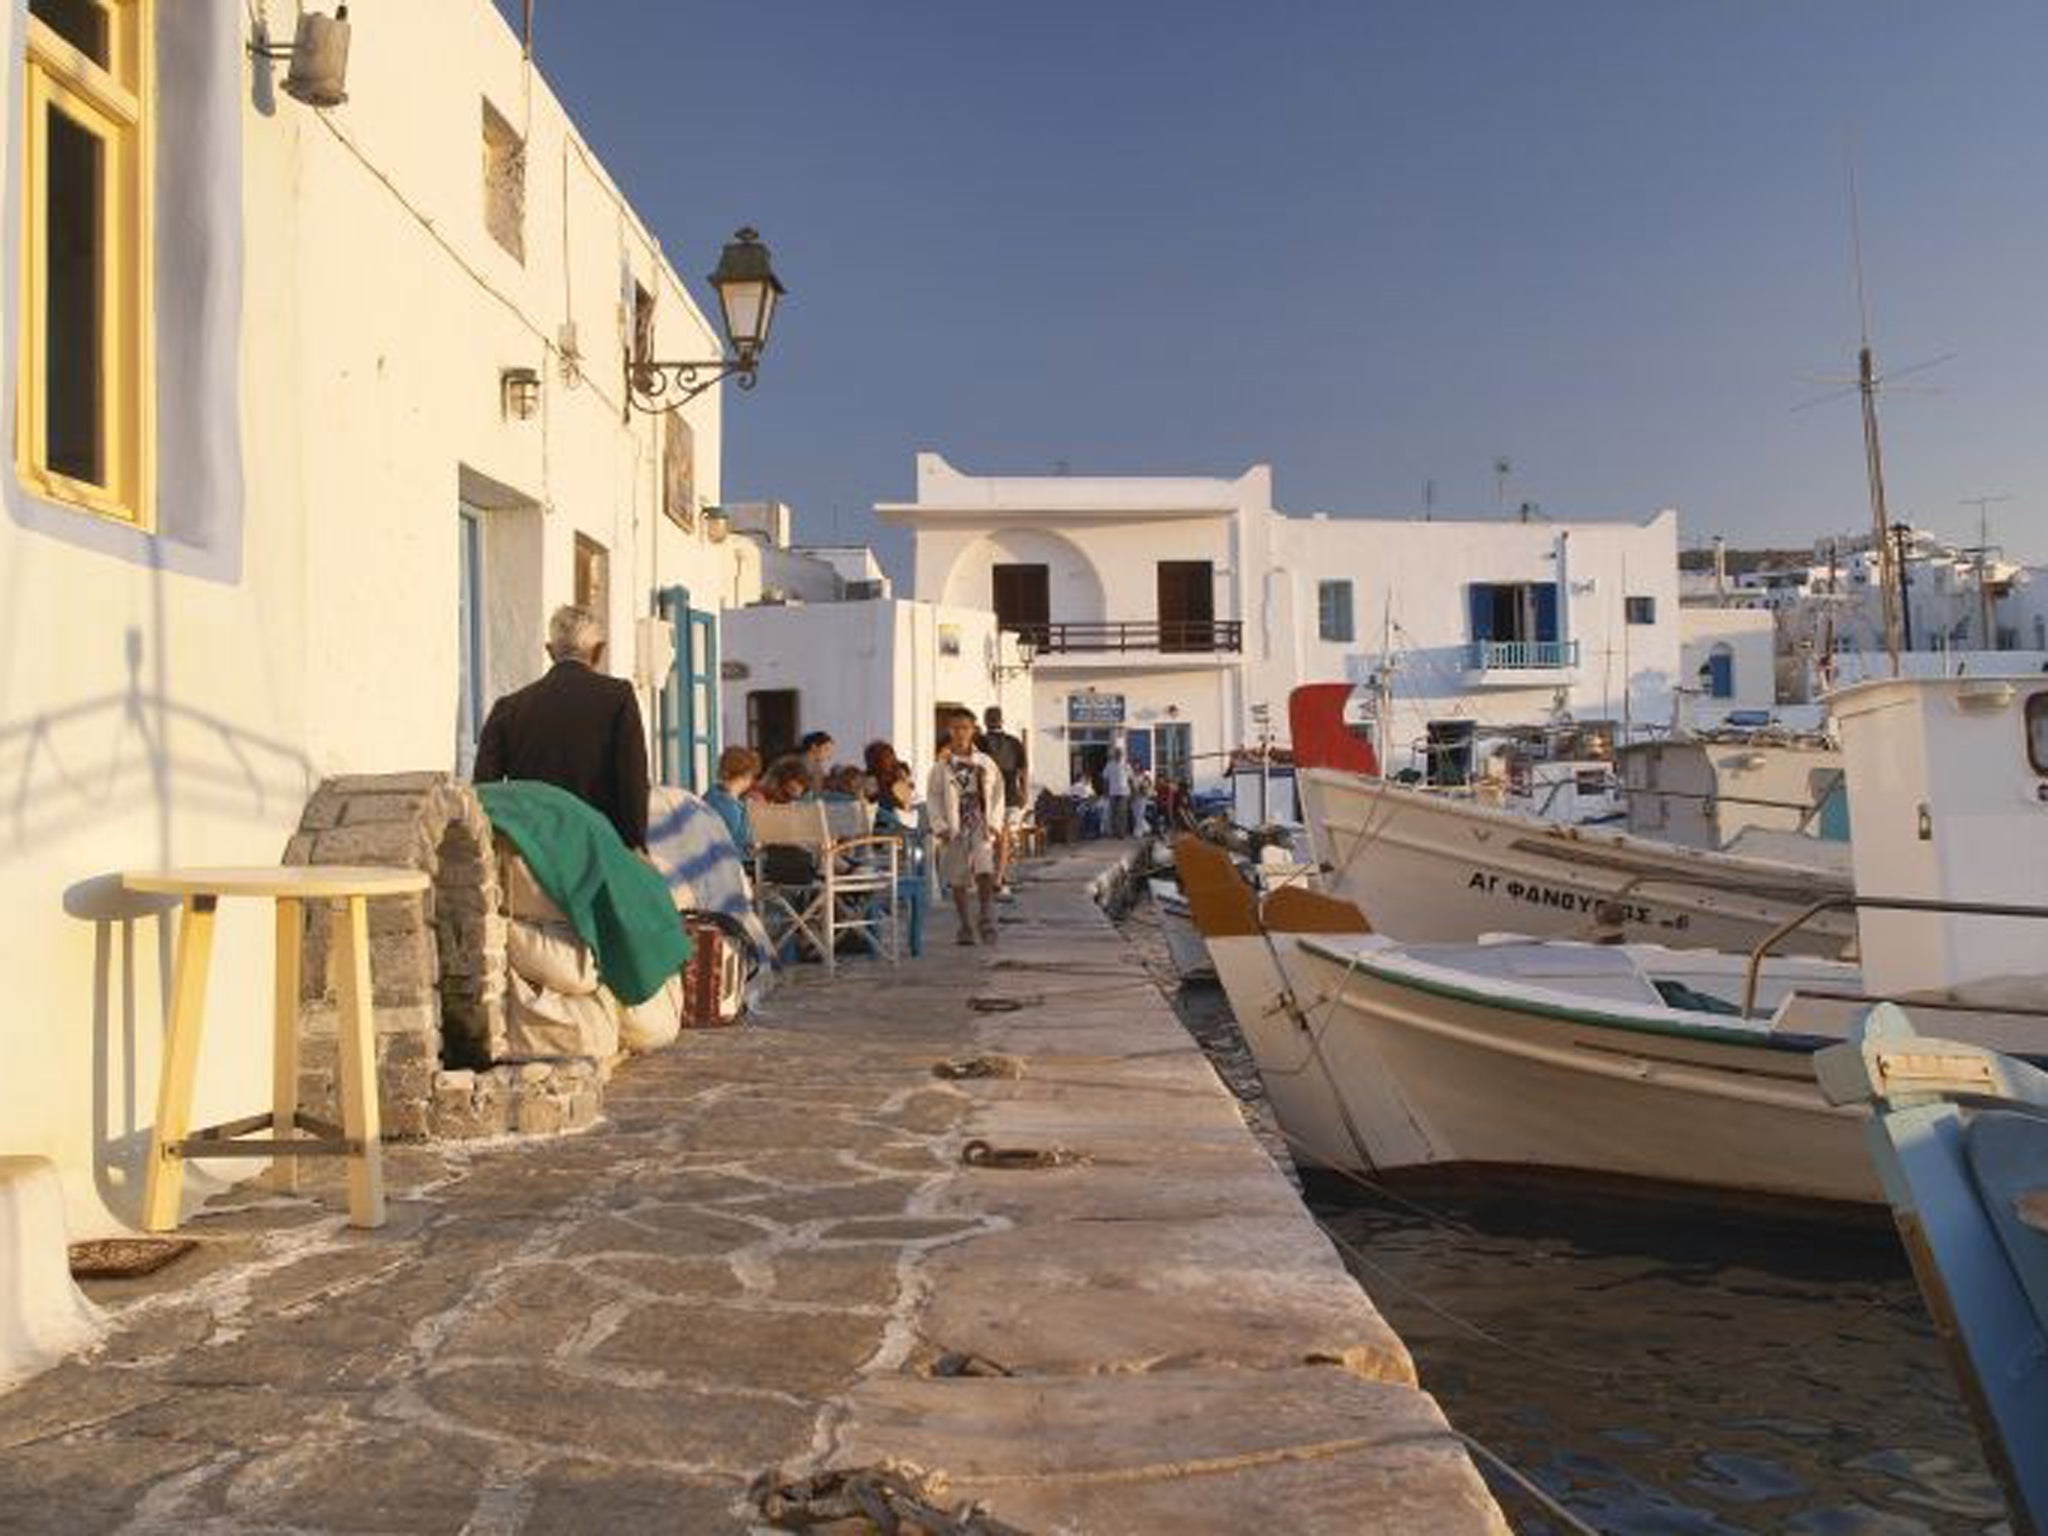 Sitting out on Paros's harbour